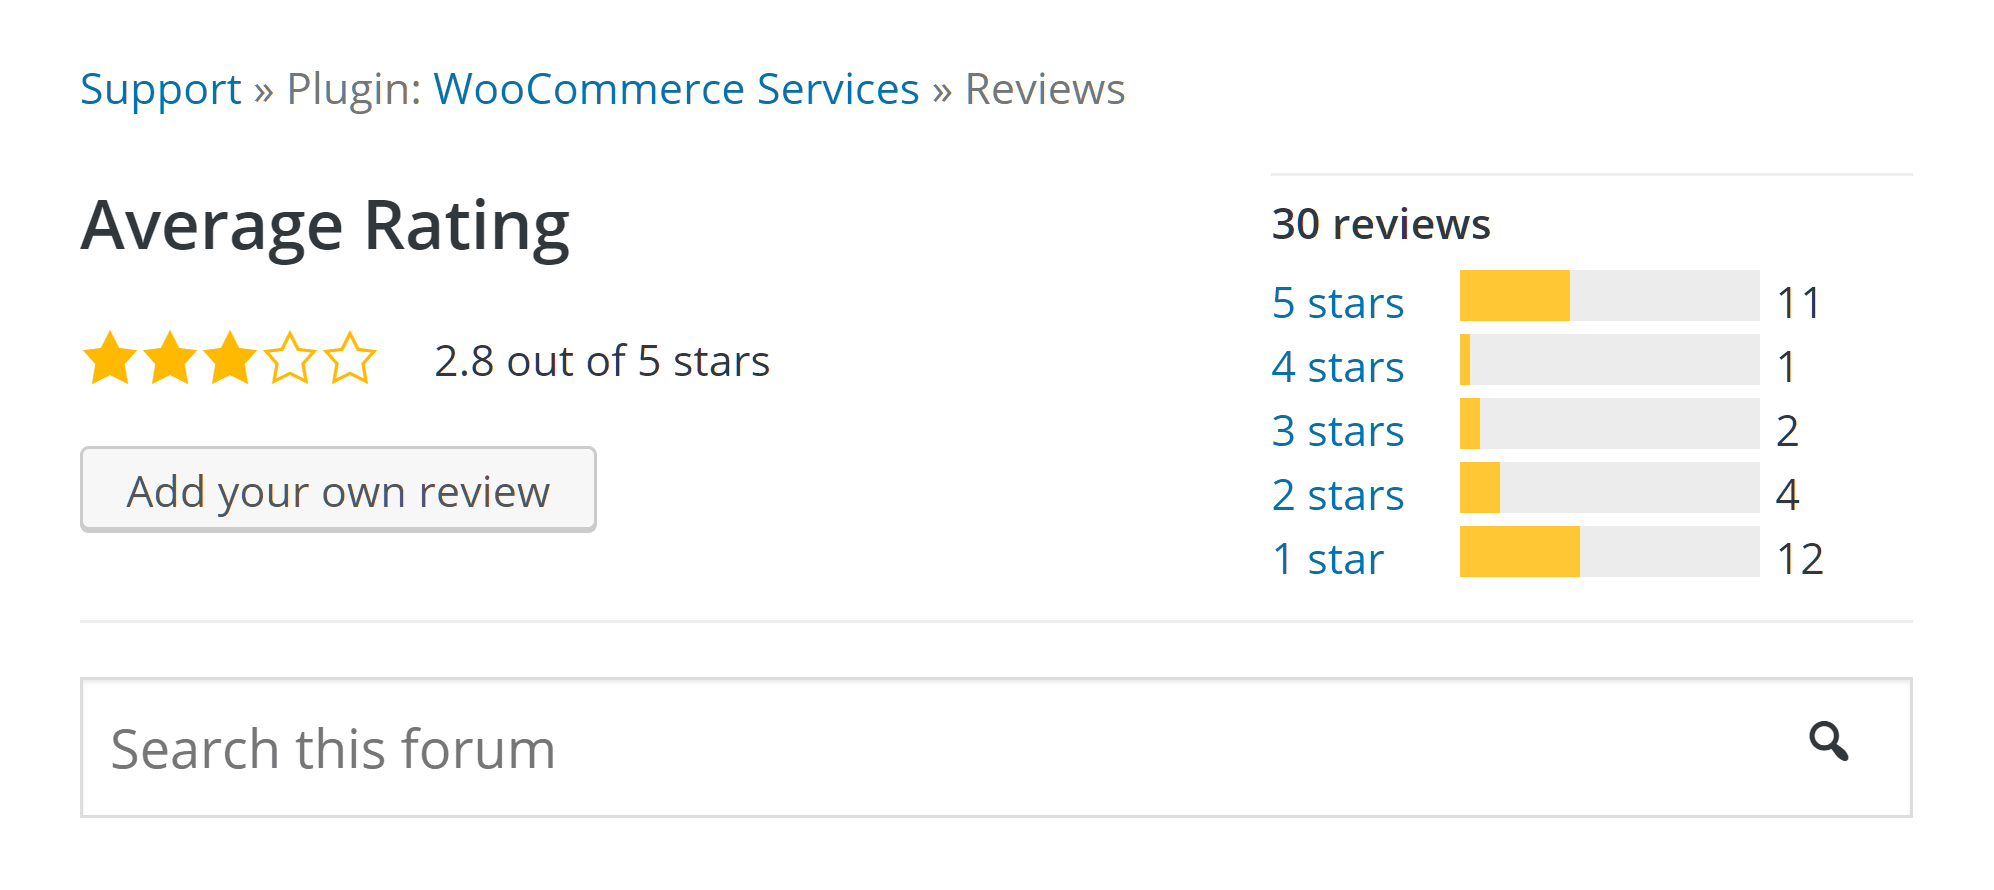 WooCommerce Services User Reviews and Ratings